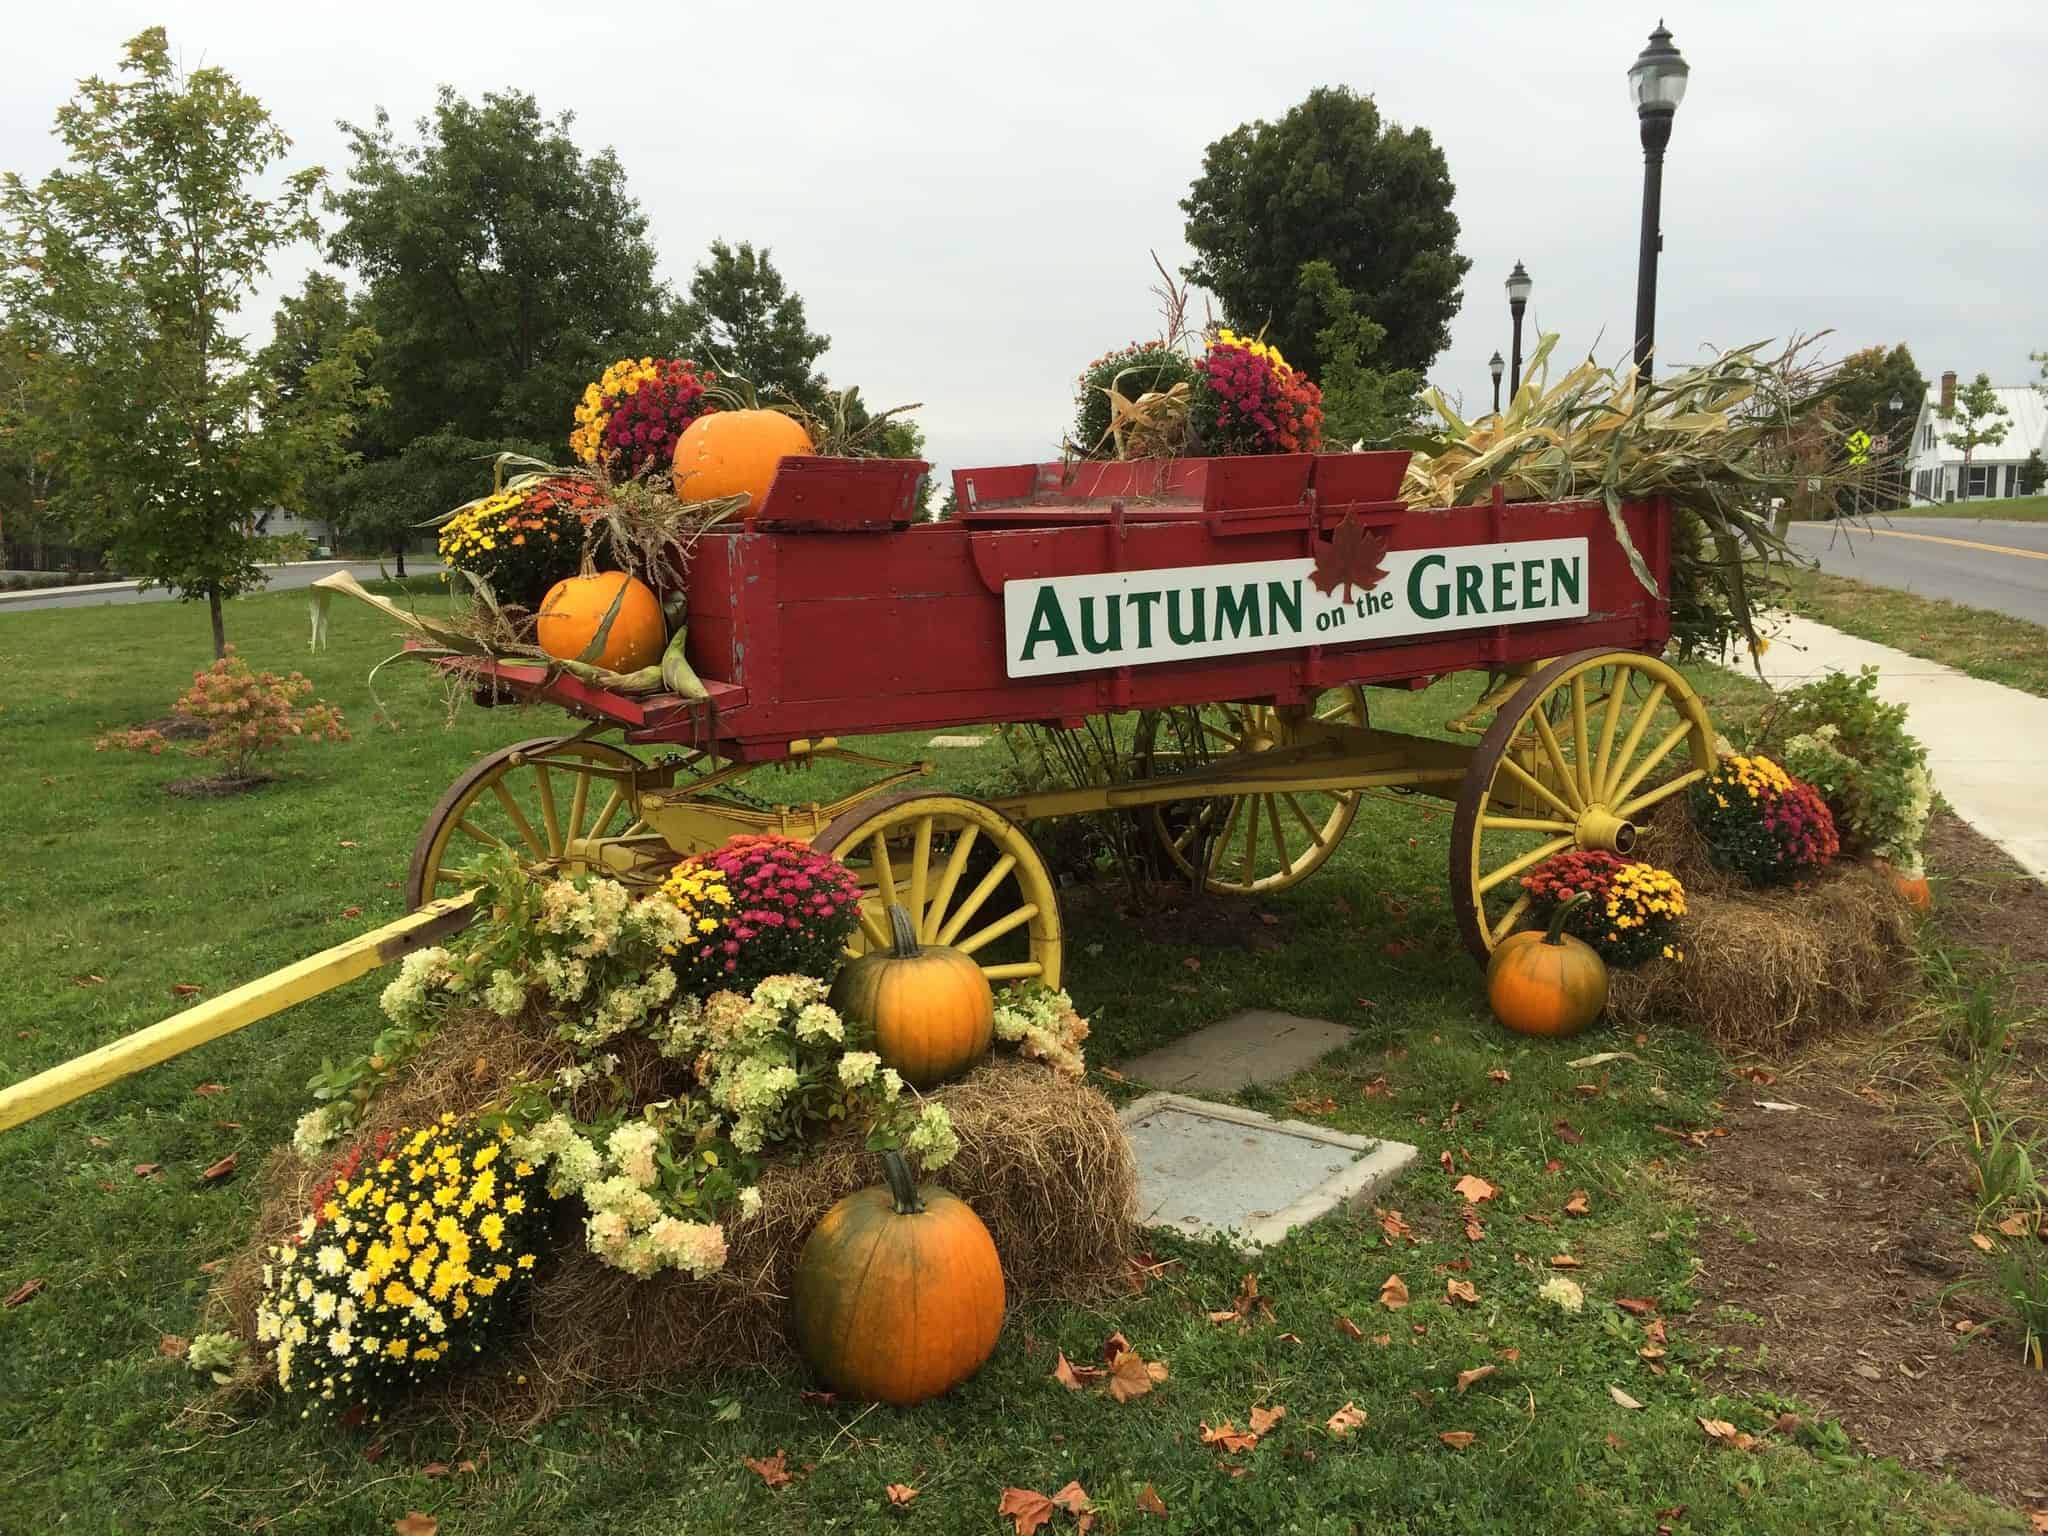 Danville Autumn on the Green Cart with Pumpkins and Flowers